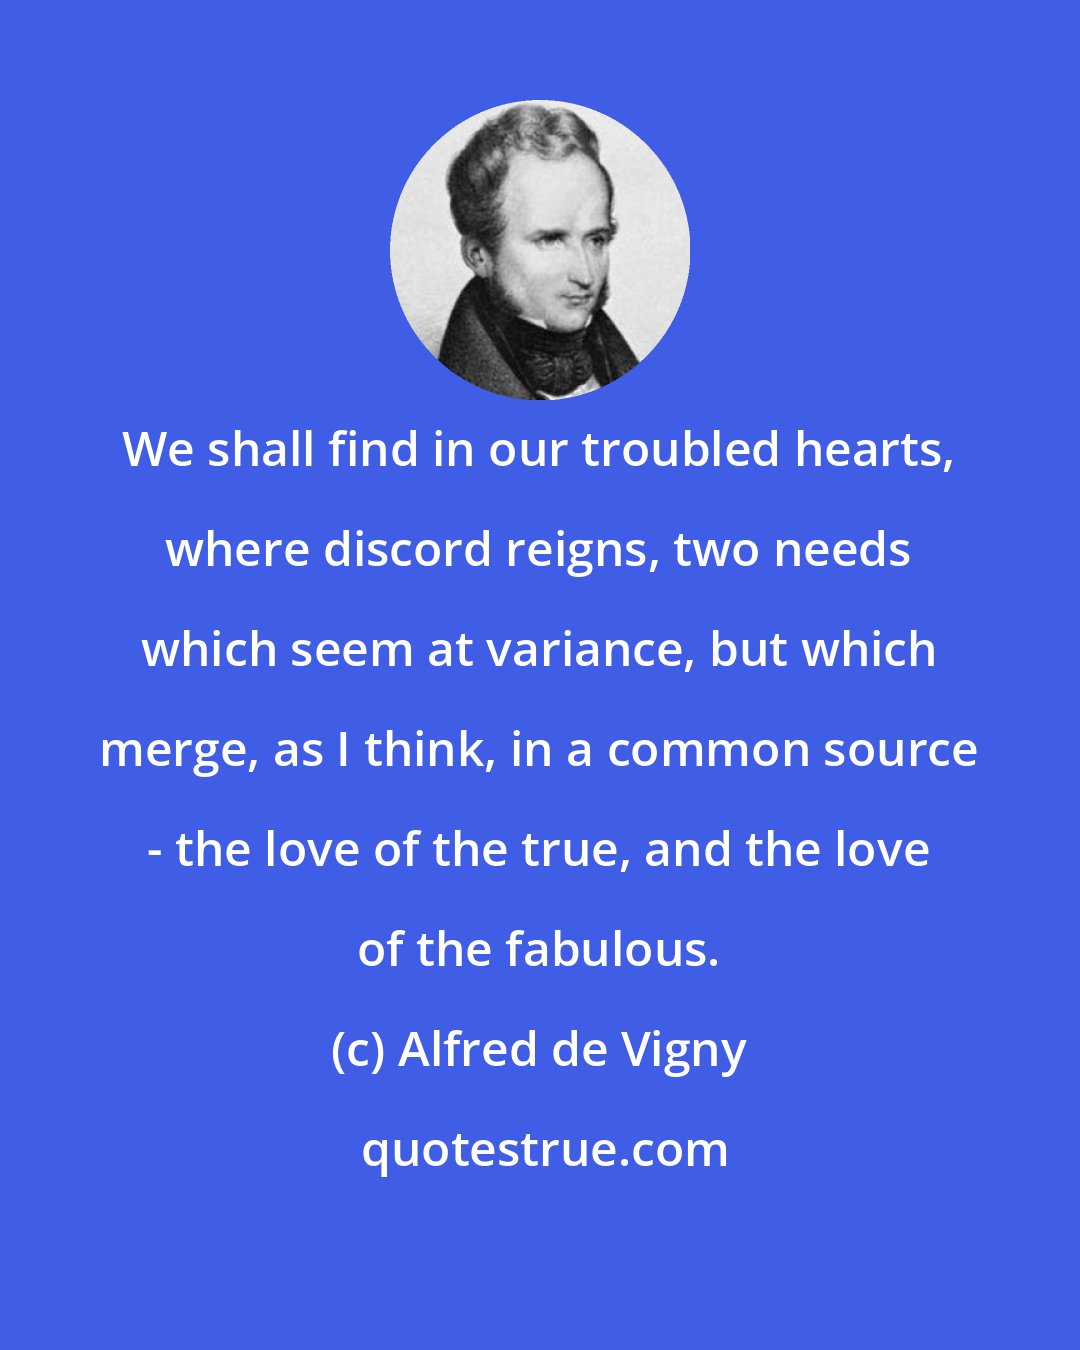 Alfred de Vigny: We shall find in our troubled hearts, where discord reigns, two needs which seem at variance, but which merge, as I think, in a common source - the love of the true, and the love of the fabulous.